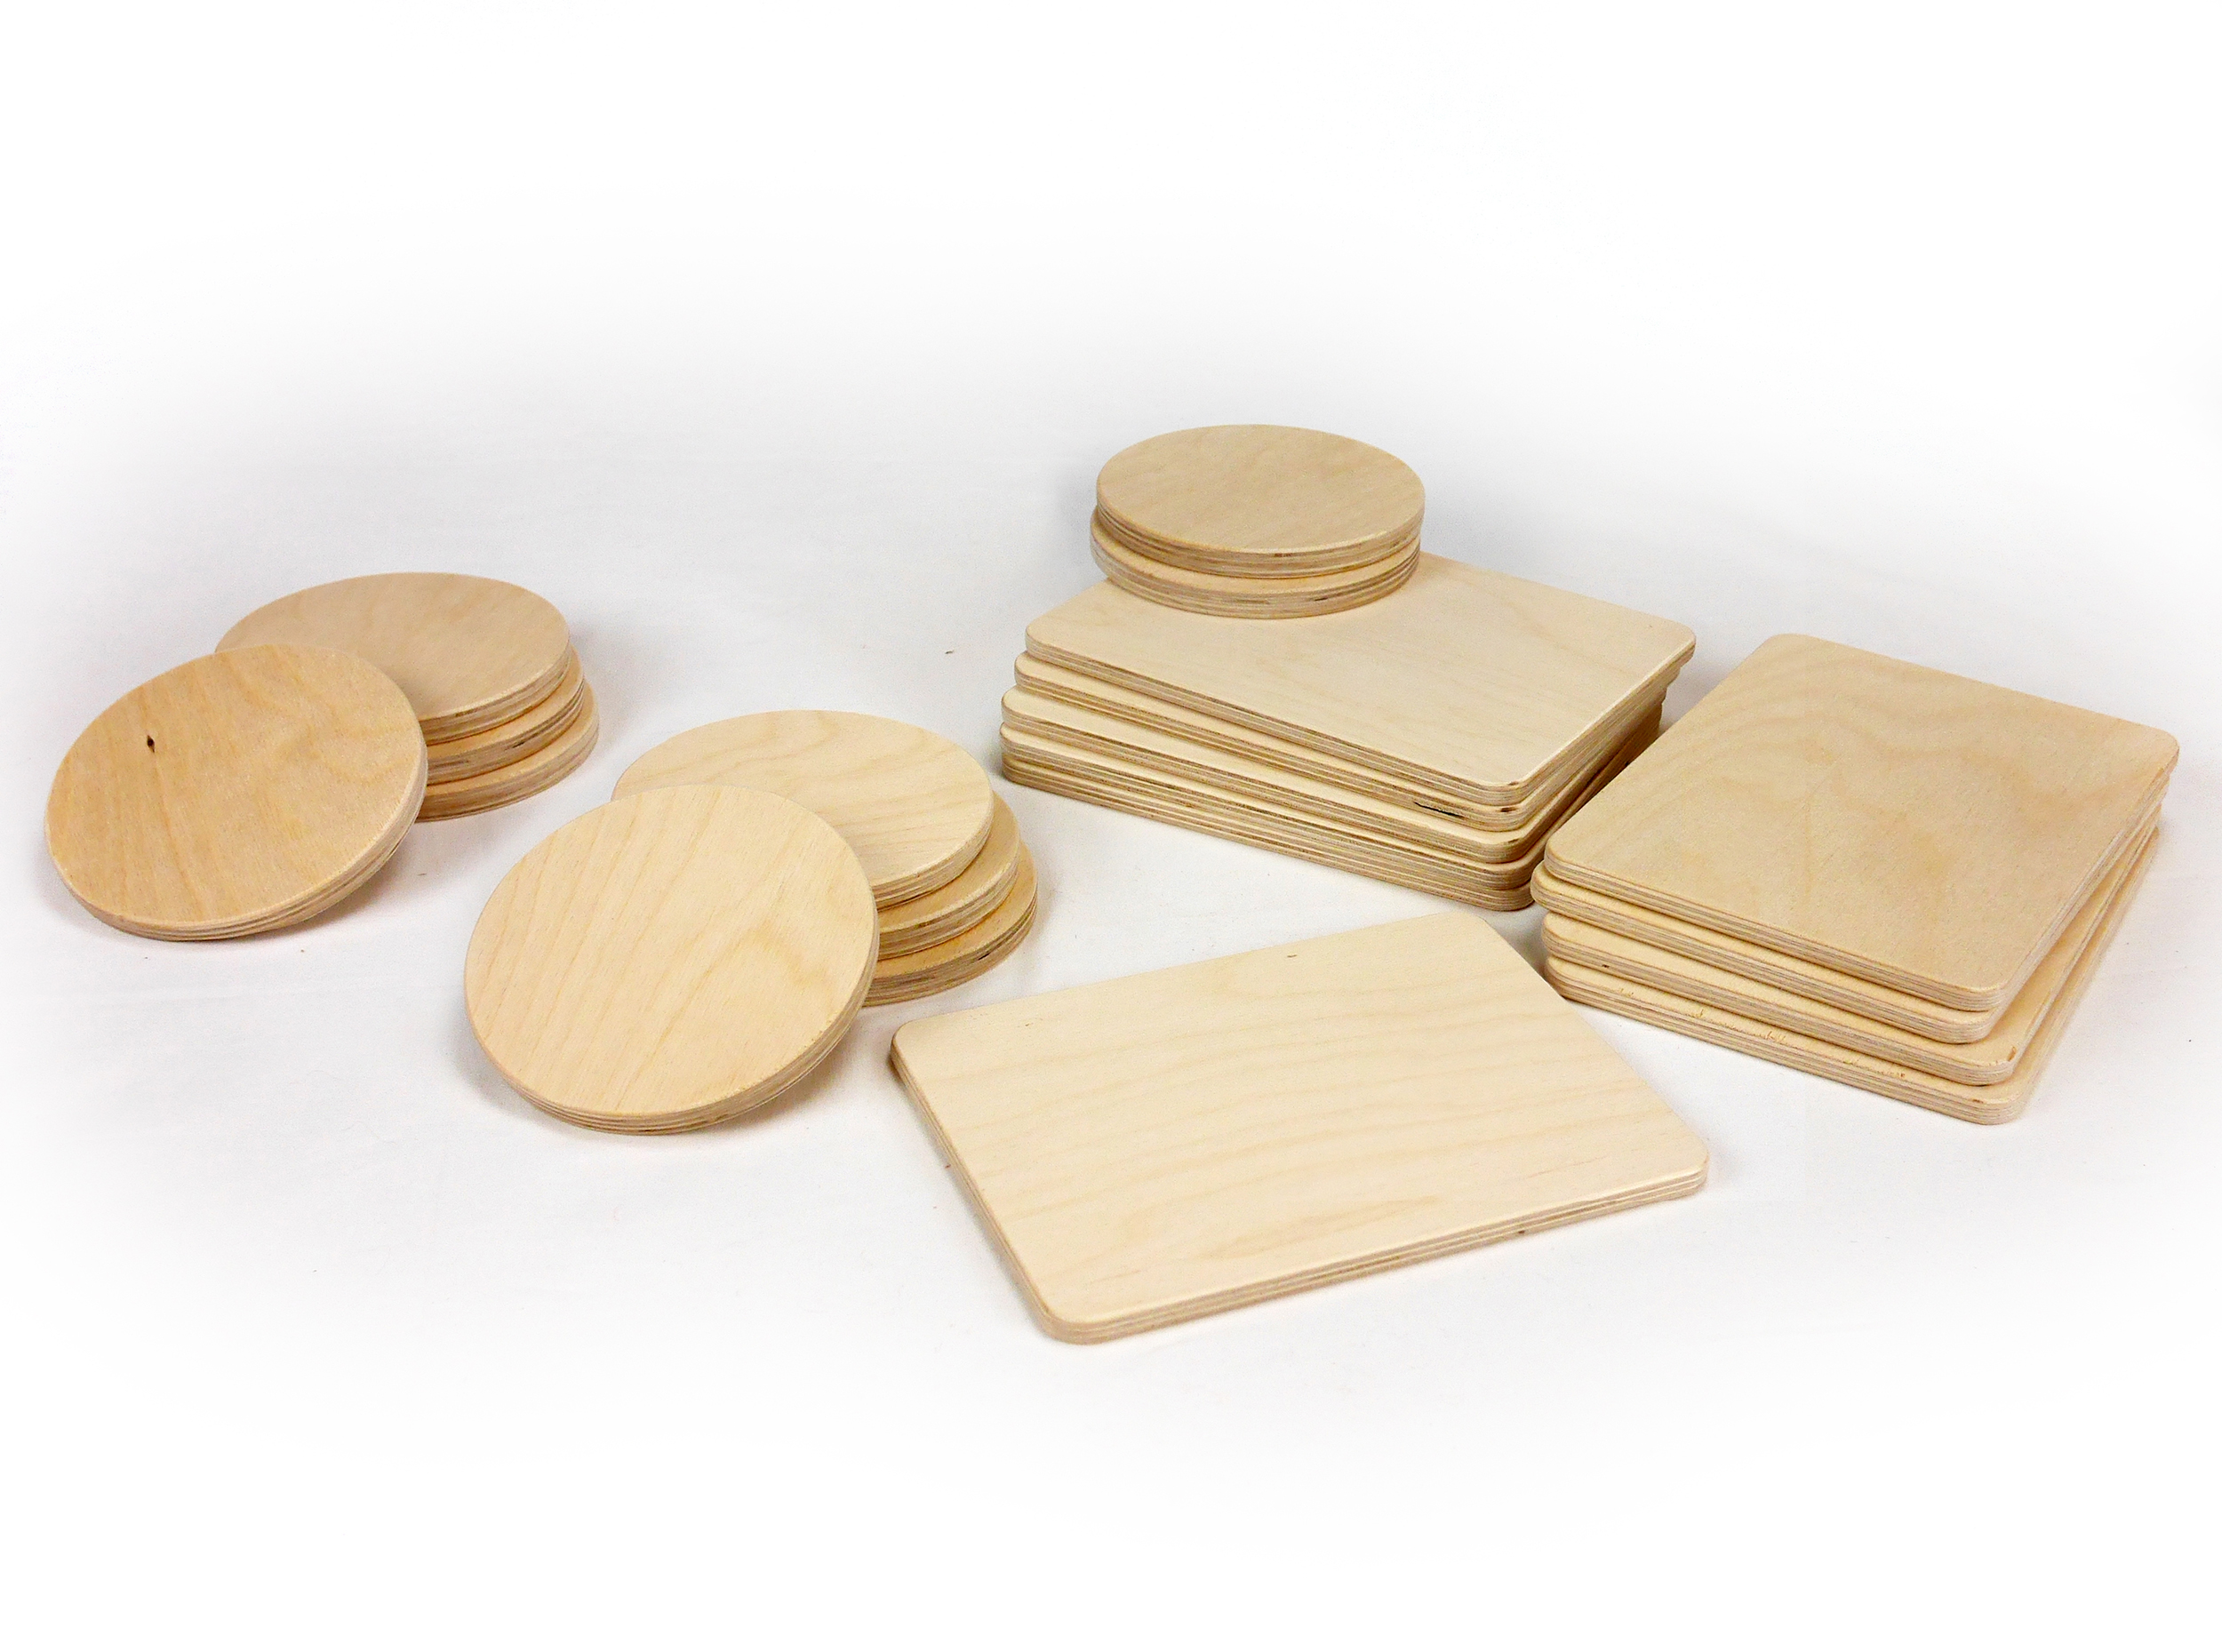 Wooden Biscuits Toy